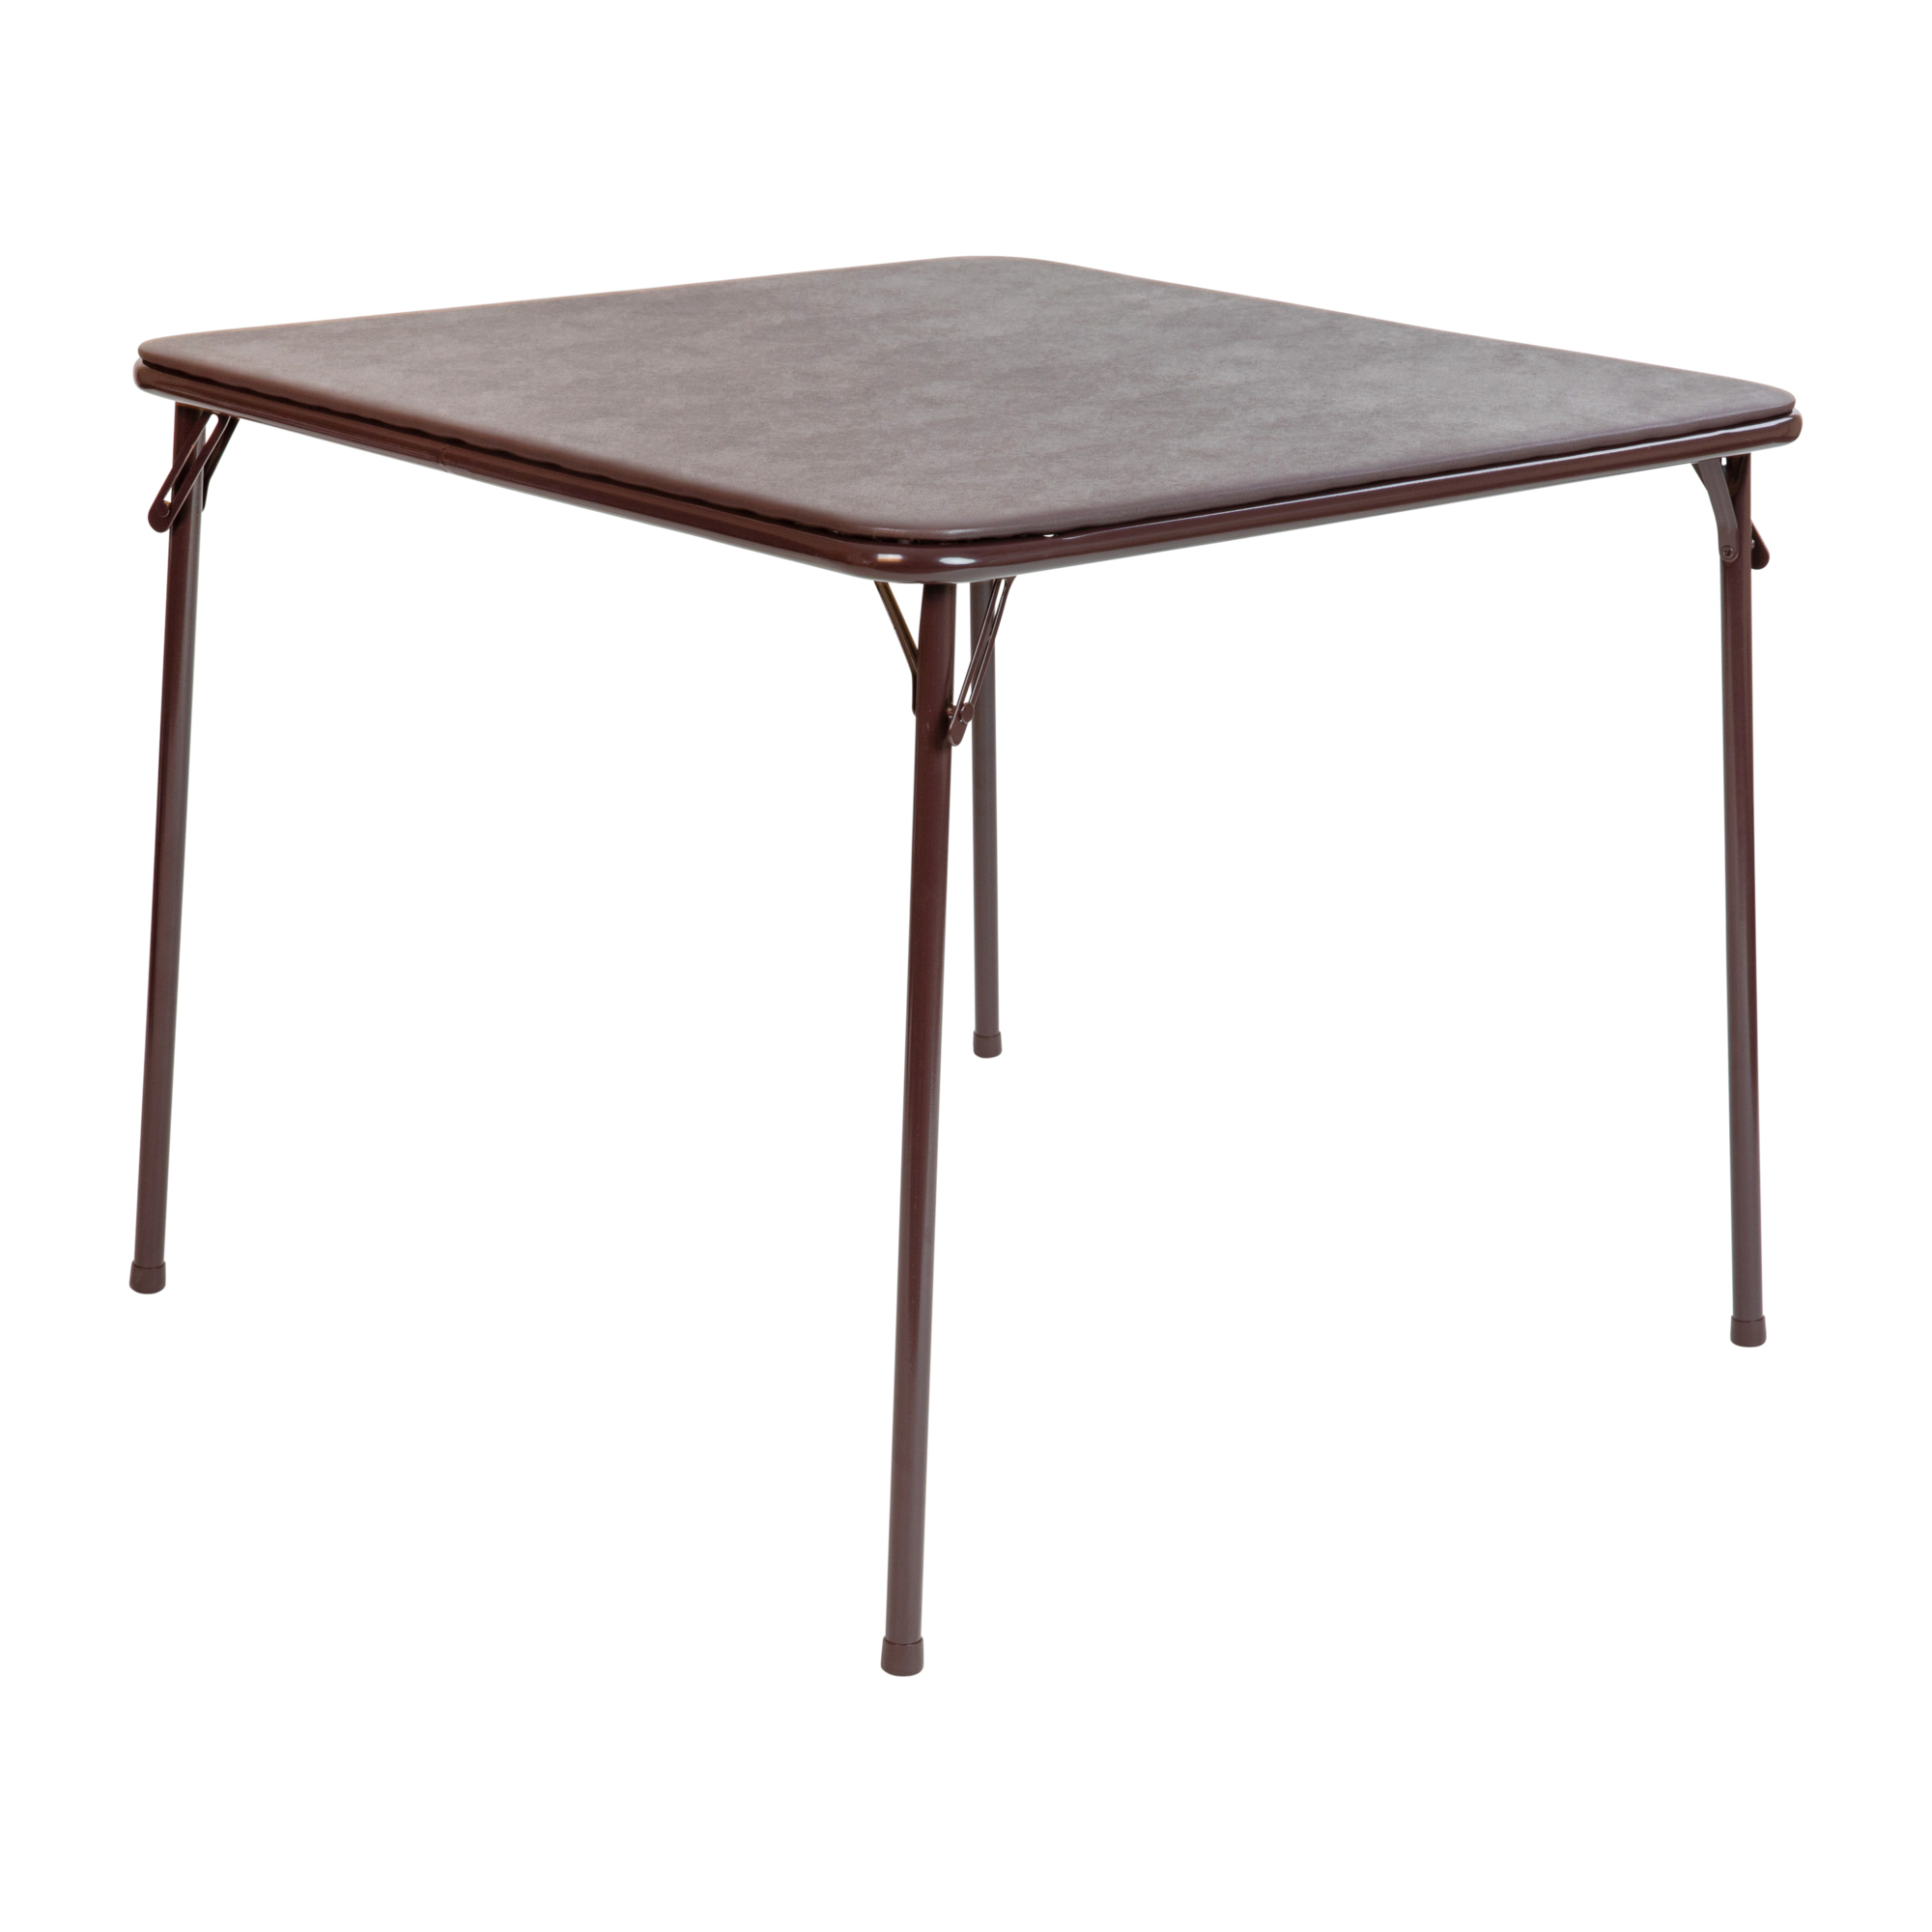 Flash Furniture, Brown Folding Card Table - Portable Game Table, Height 27.75 in, Width 33.5 in, Length 33.5 in, Model JB2BR